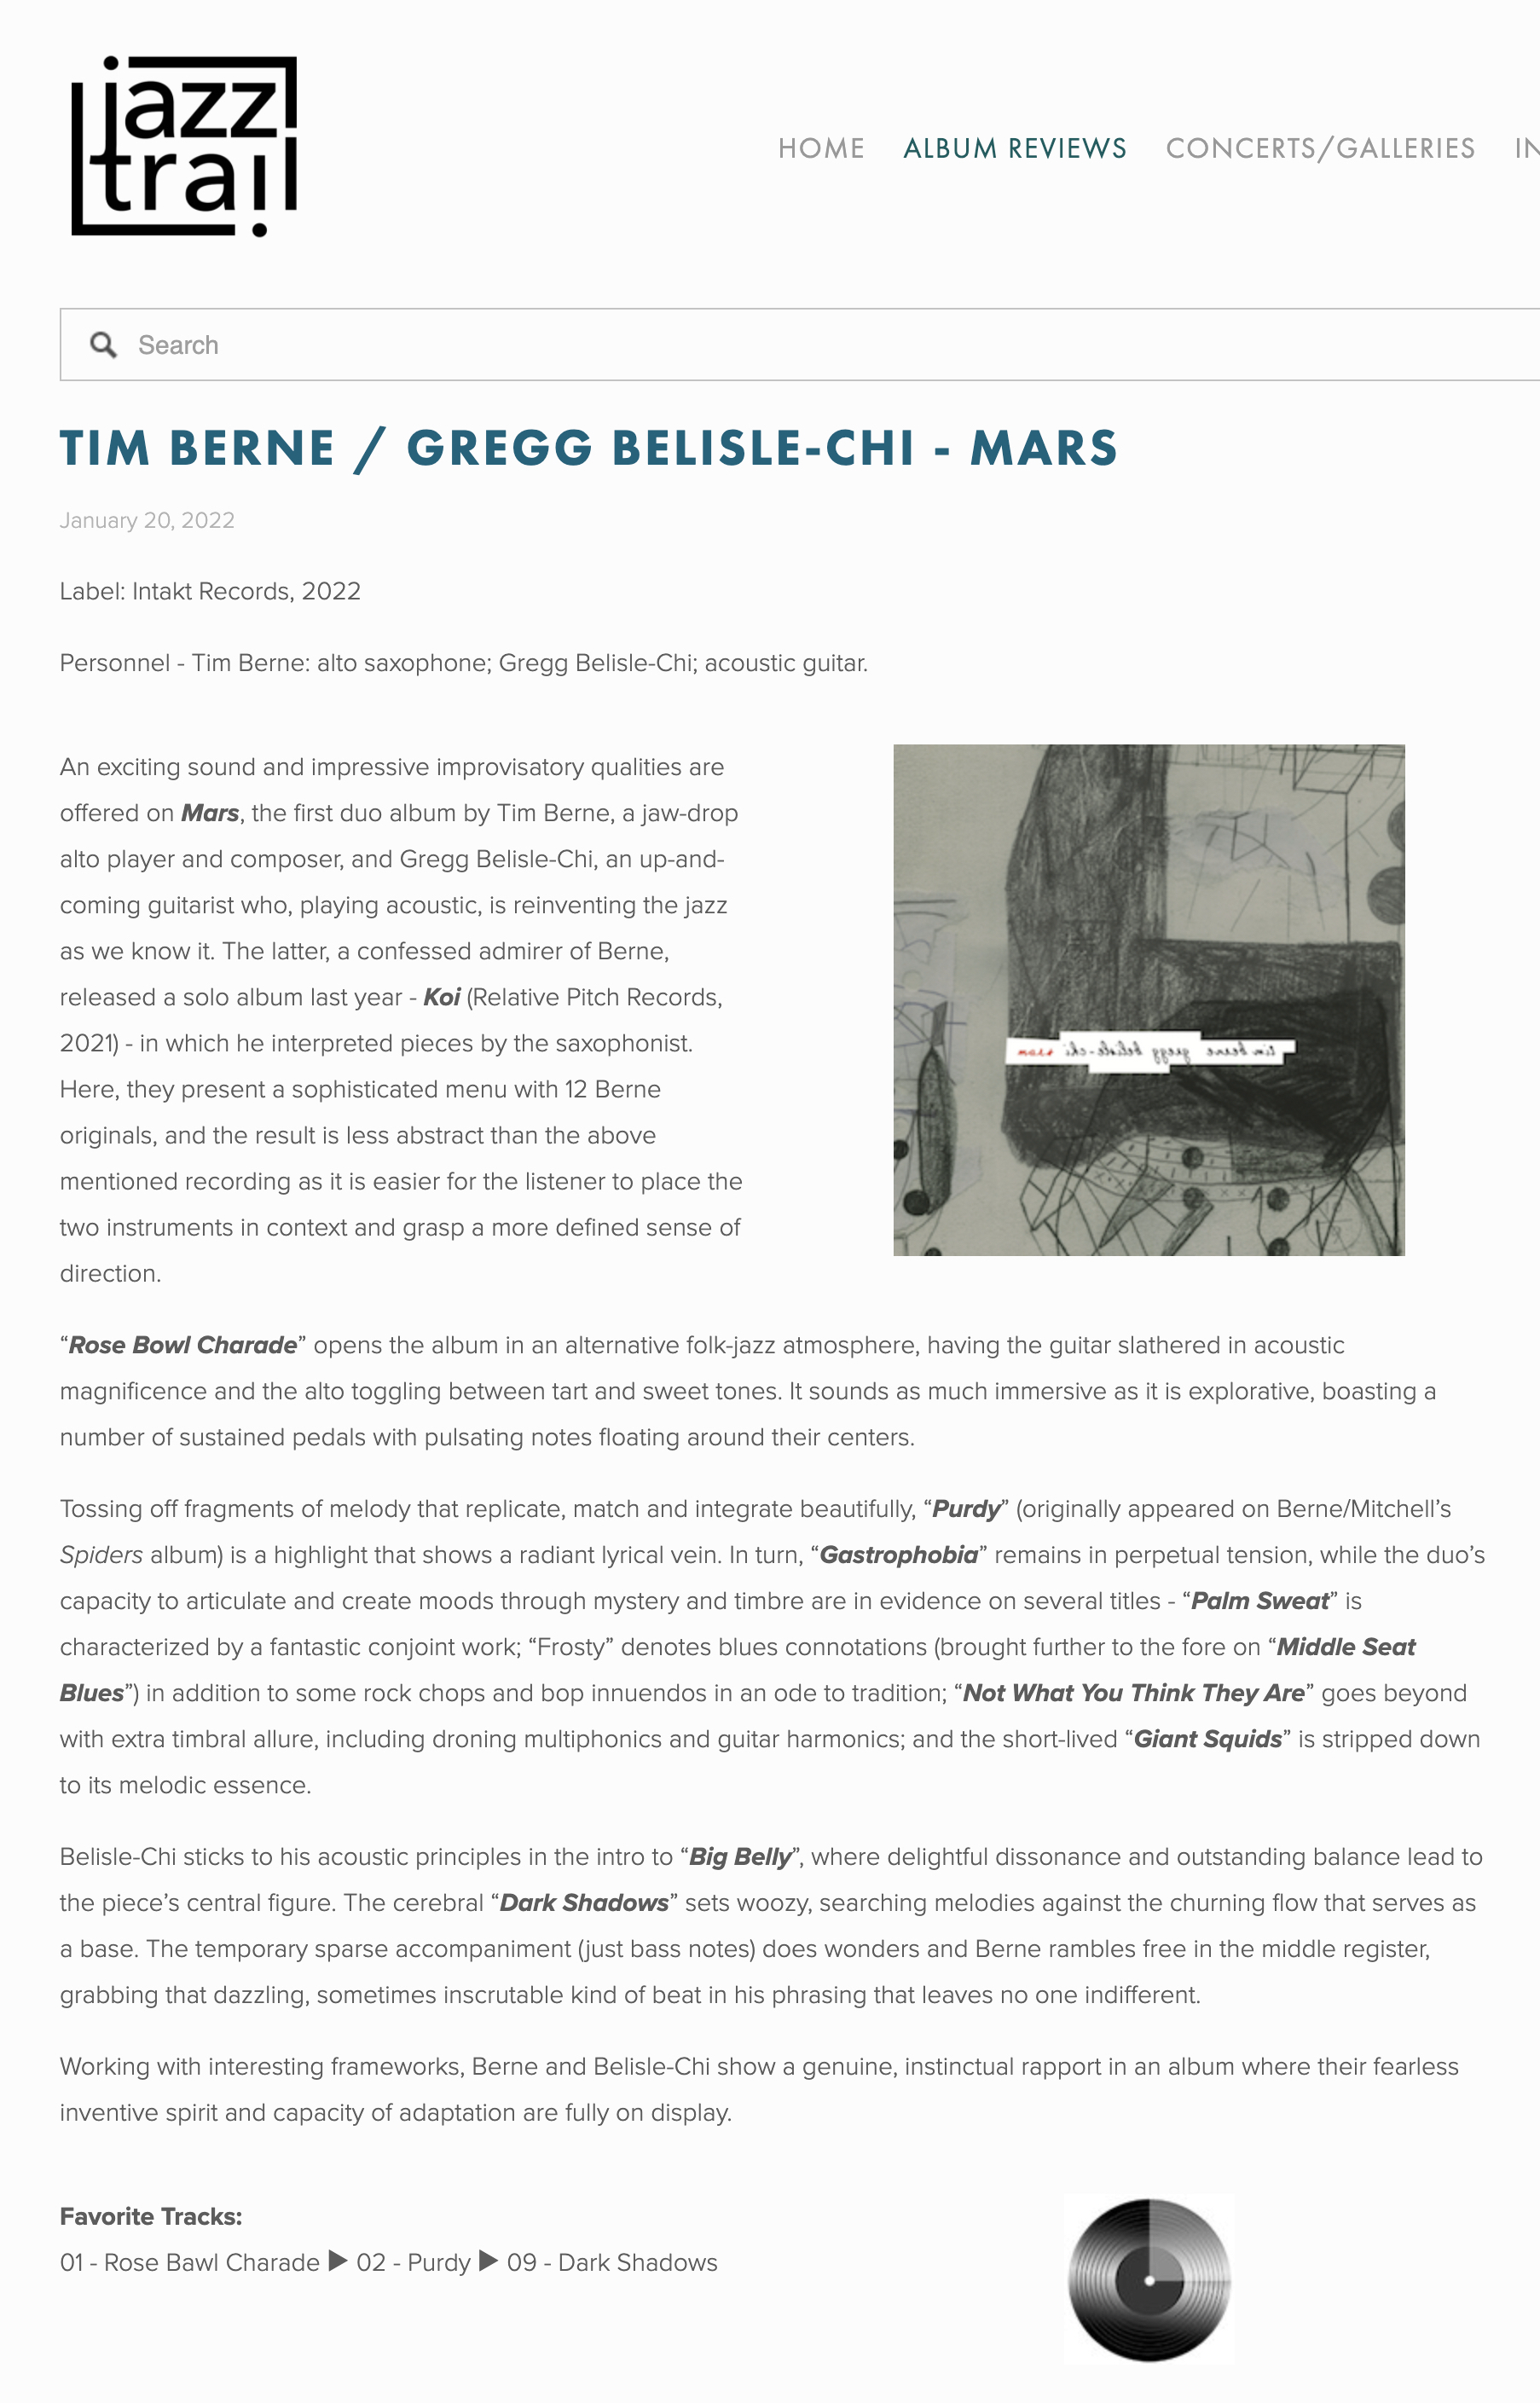 An exciting sound and impressive improvisatory qualities are offered on Mars, the first duo album by Tim Berne, a jaw-drop alto player and composer, and Gregg Belisle-Chi, an up-and-coming guitarist who, playing acoustic, is reinventing the jazz as we know it. The latter, a confessed admirer of Berne, released a solo album last year - Koi (Relative Pitch Records, 2021) - in which he interpreted pieces by the saxophonist. Here, they present a sophisticated menu with 12 Berne originals, and the result is less abstract than the above mentioned recording as it is easier for the listener to place the two instruments in context and grasp a more defined sense of direction.